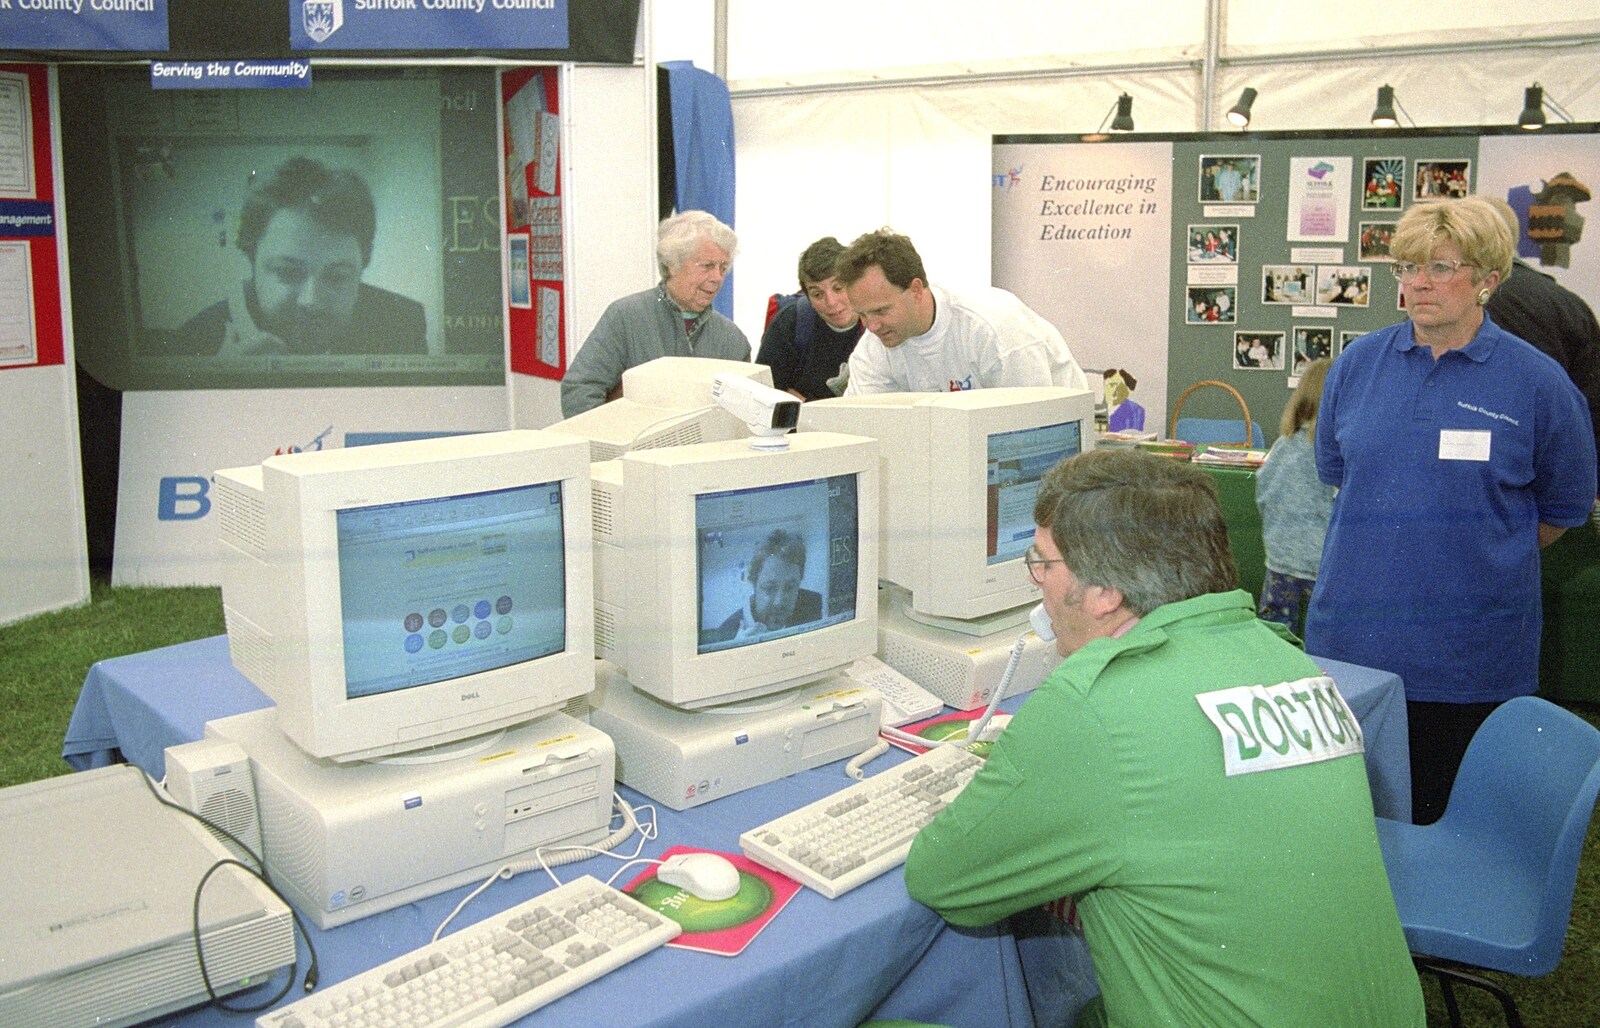 Chris Mole on the video conference from CISU do 'Internet-in-a-field', Suffolk Show, Ipswich - May 21st 1997